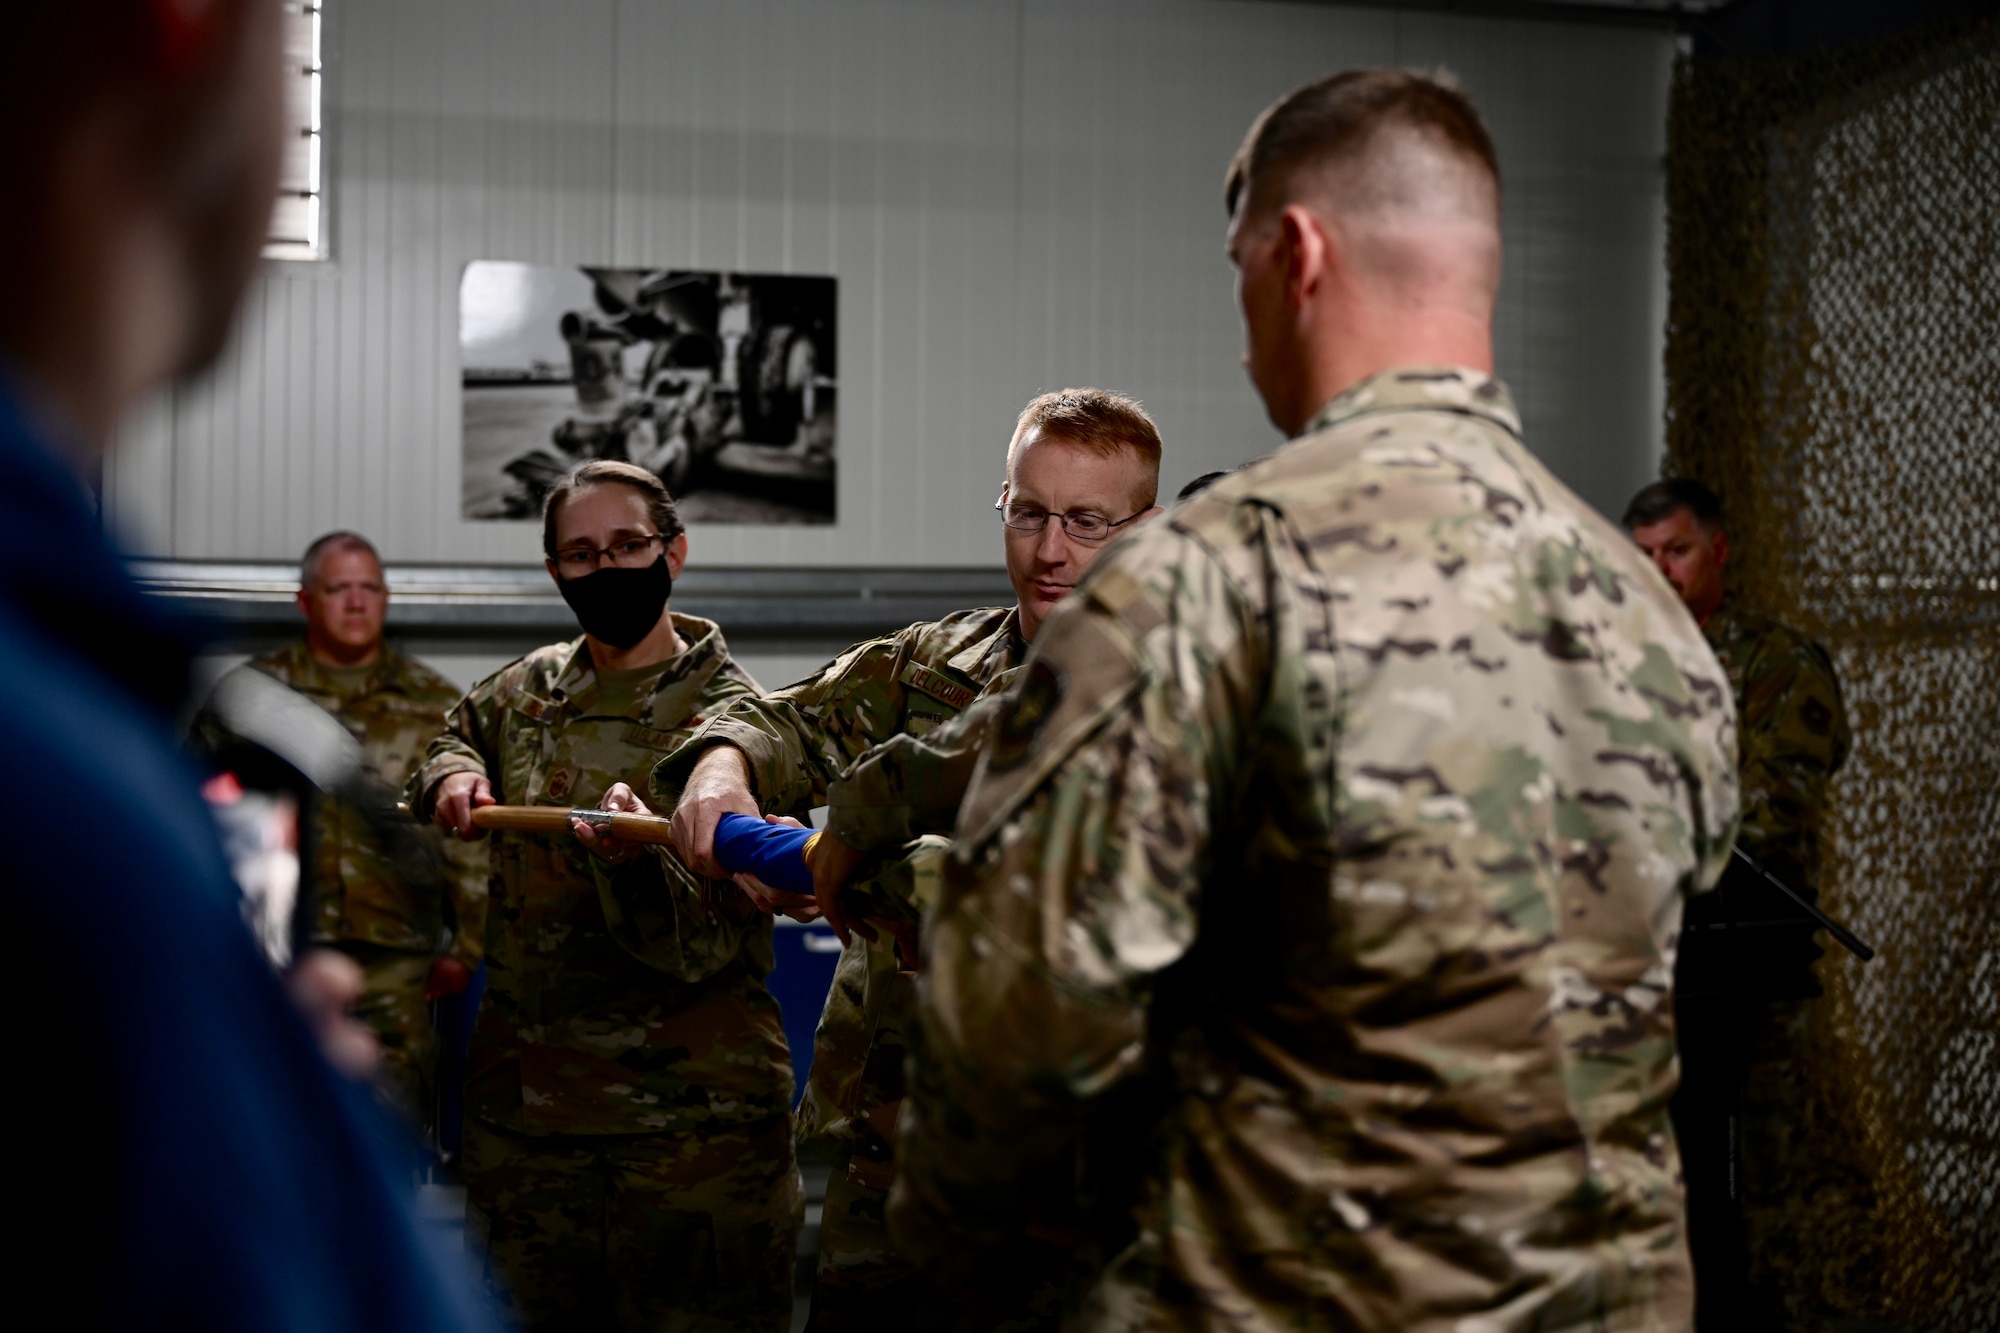 U.S. Air Force Col. Nicholas Delcour, 521st Air Mobility Operations Wing vice commander (left), and members of the 5th Expeditionary Air Mobility Squadron furl the guidon during an inactivation ceremony for the 5th EAMS at Al Mubarak Air Base (Cargo City), Kuwait, June 23, 2022.